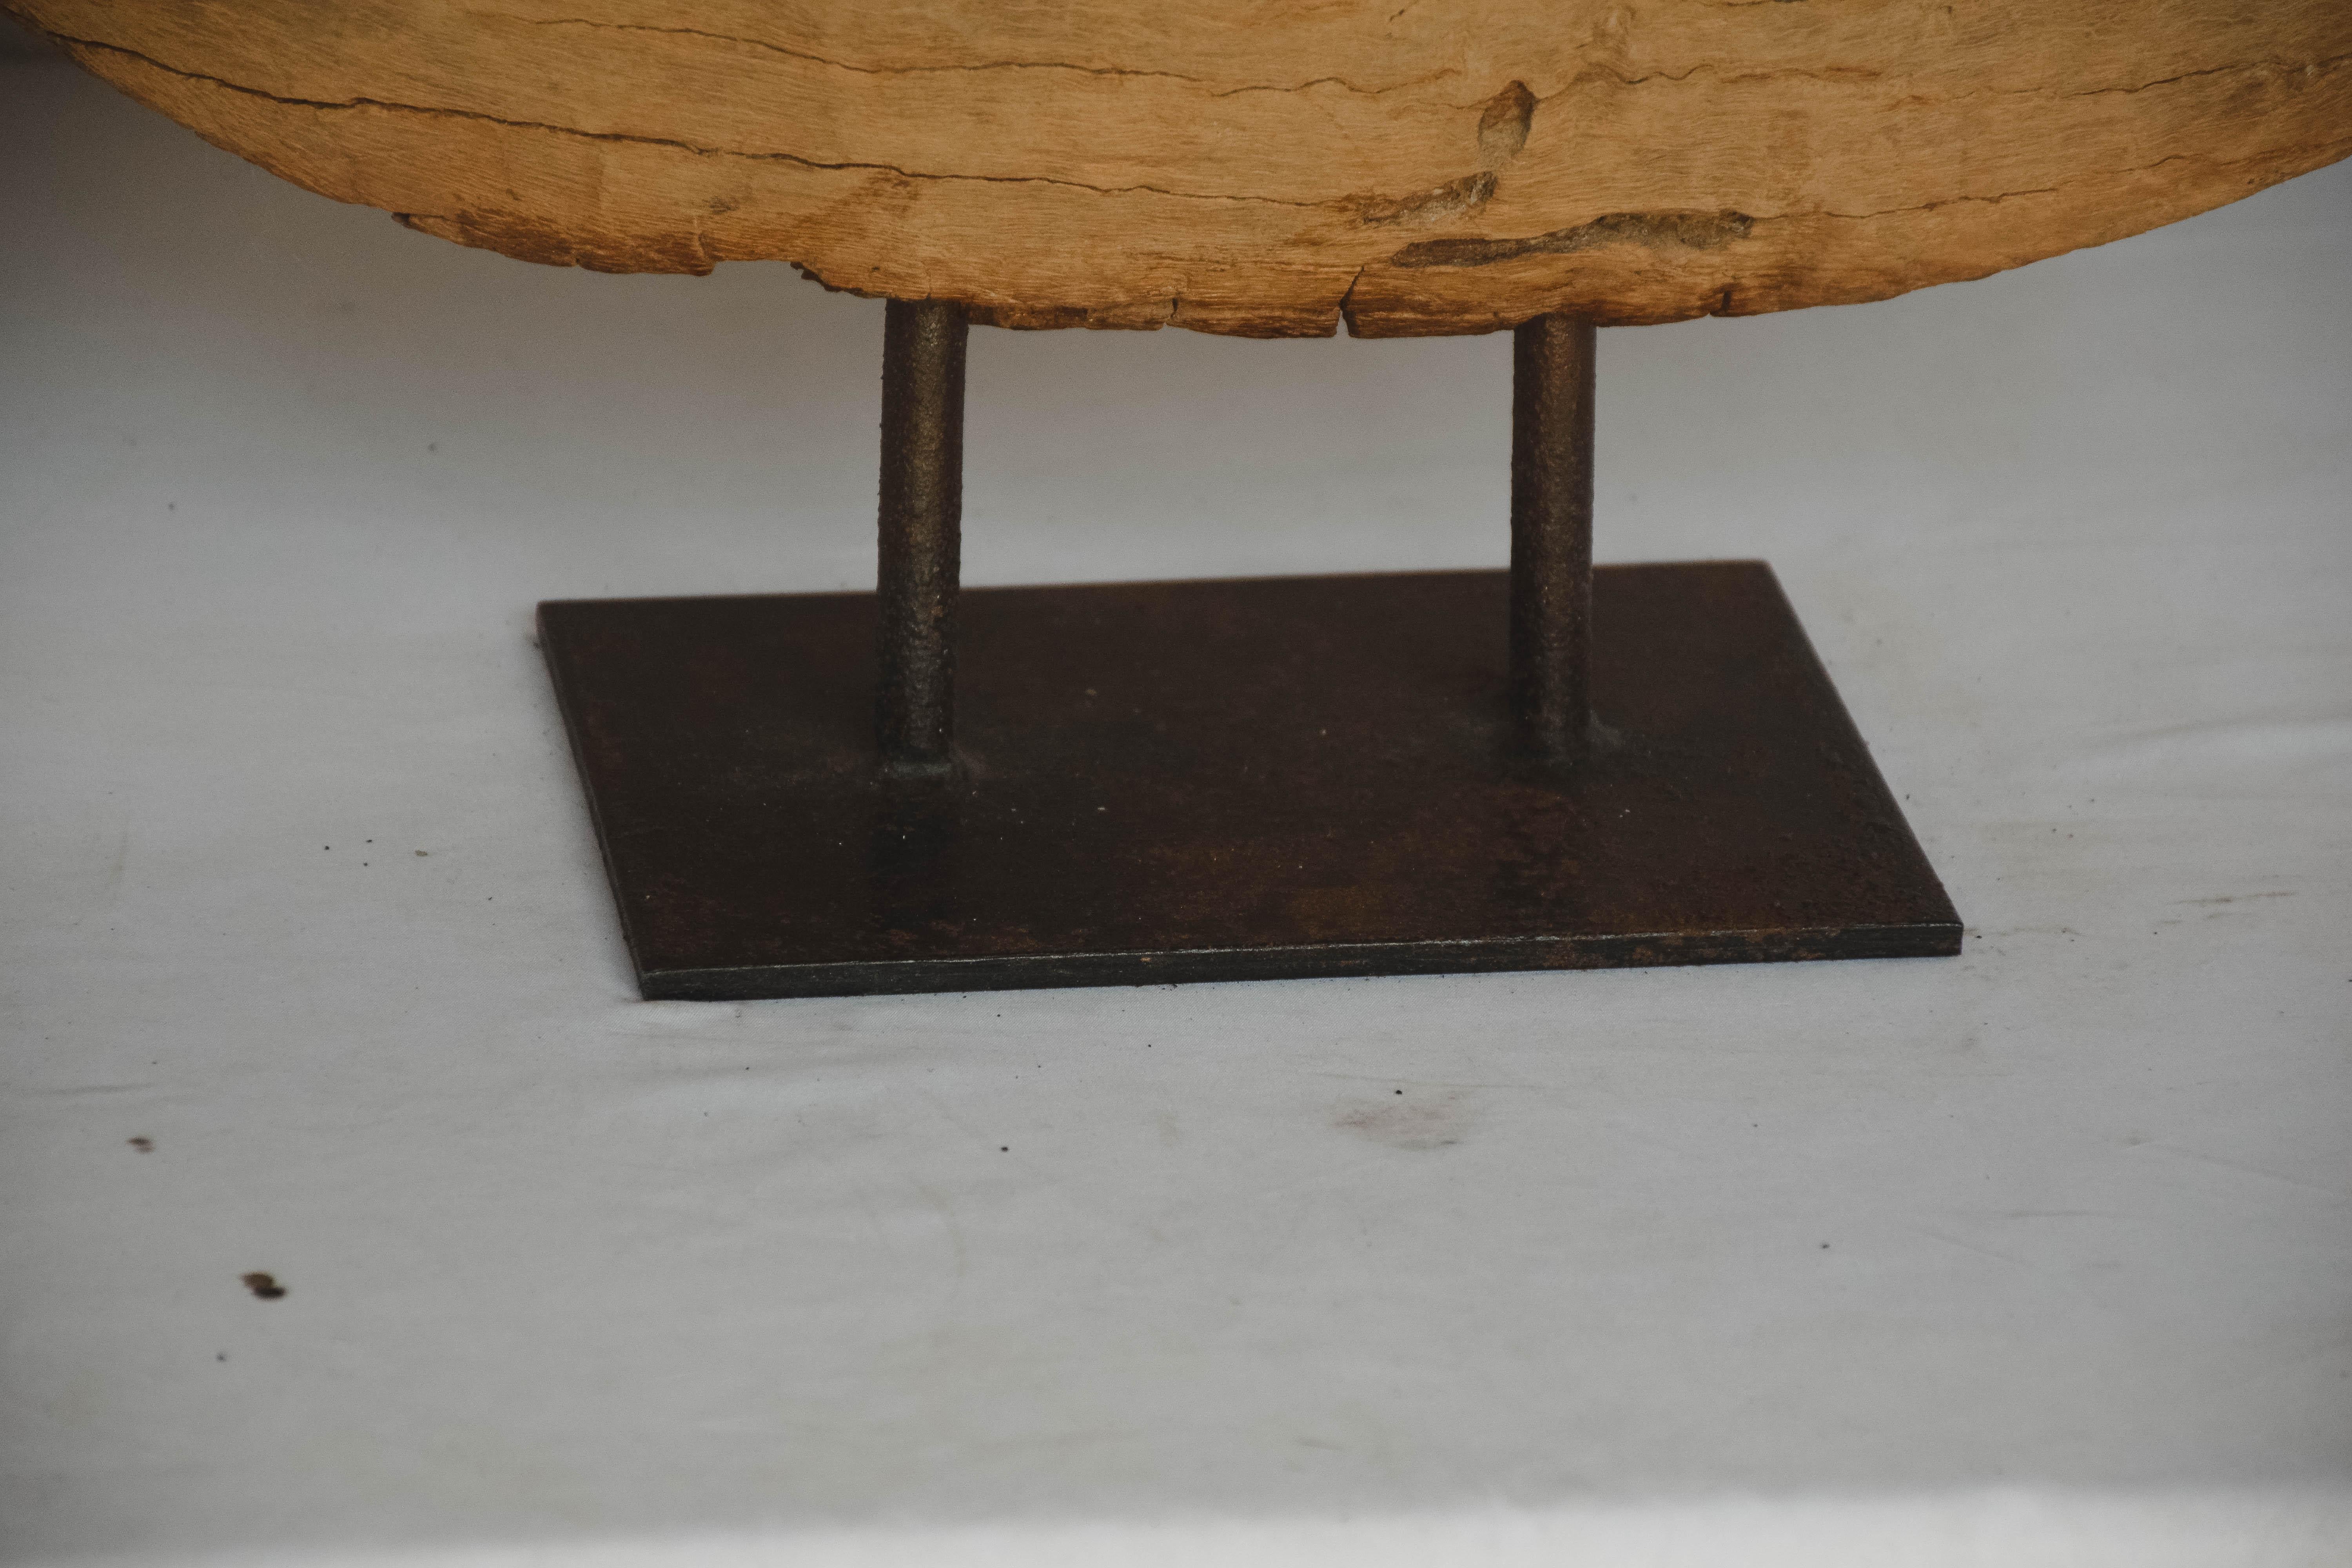 Vintage rustic wood wheel from a wooden cart mounted on an iron stand. This large hand carved wooden wheel shows natural age splits and texture and will serve as a wonderful piece of art.